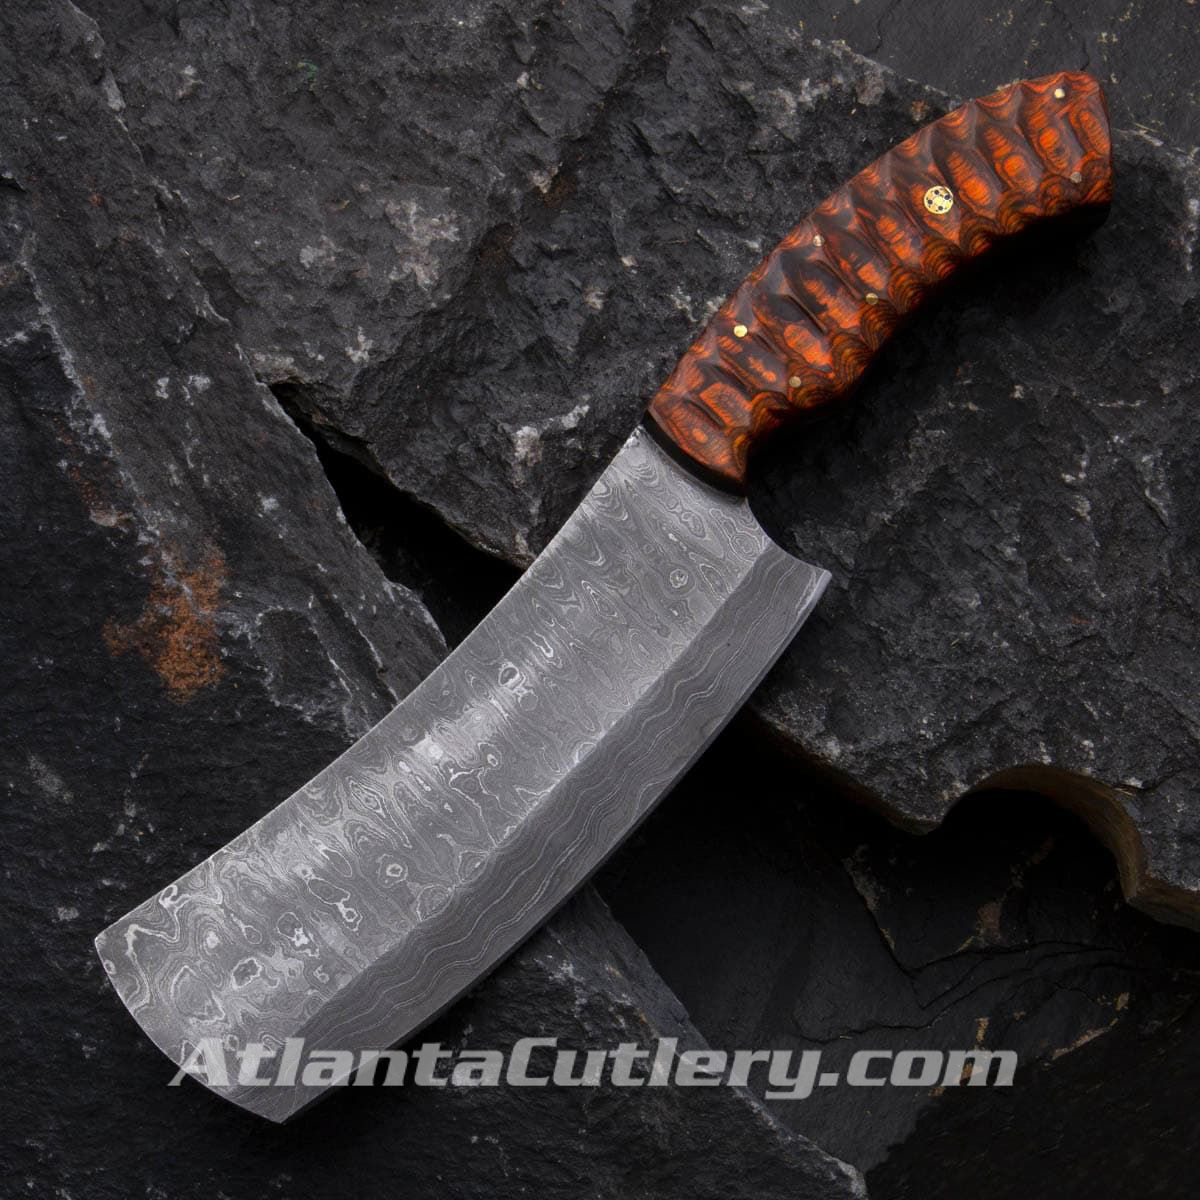 Full Tang Damascus Steel blade cleaver with contoured laminated wood scales, includes leather sheath